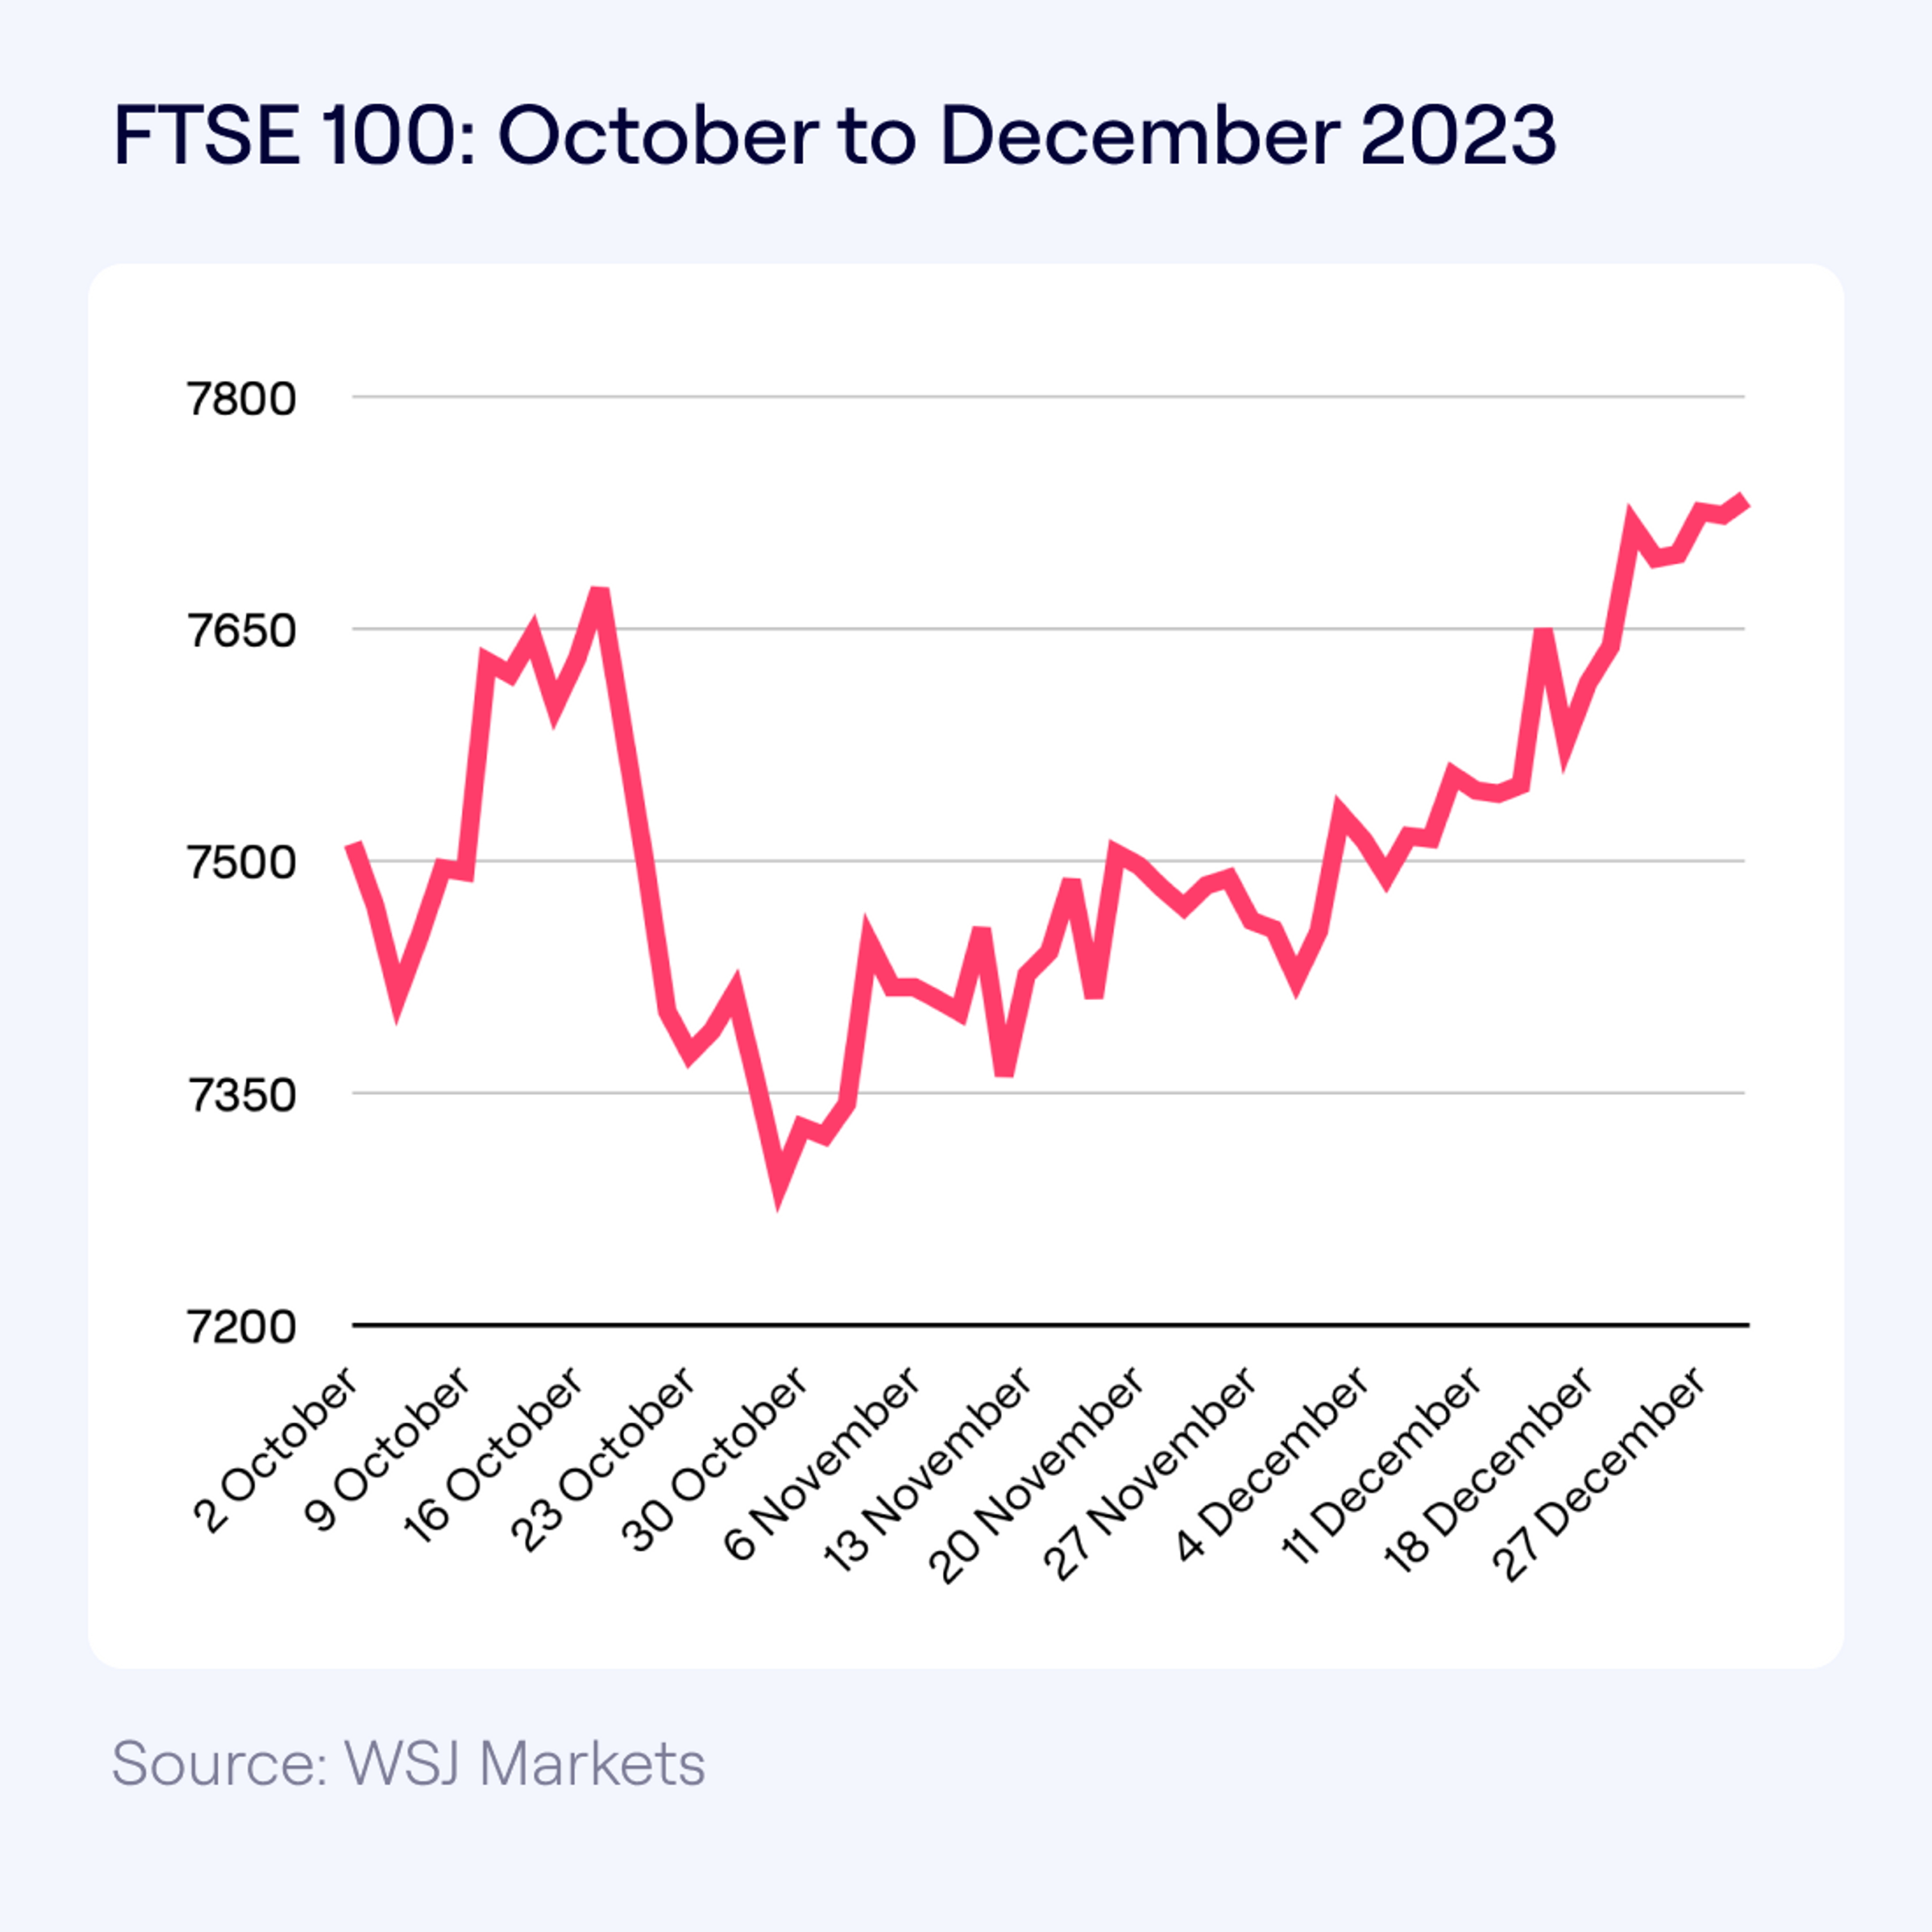 Line graph displaying the FTSE 100 index from October to December 2023. It shows a dip in early November, followed by a recovery and a gradual upward trend through December.